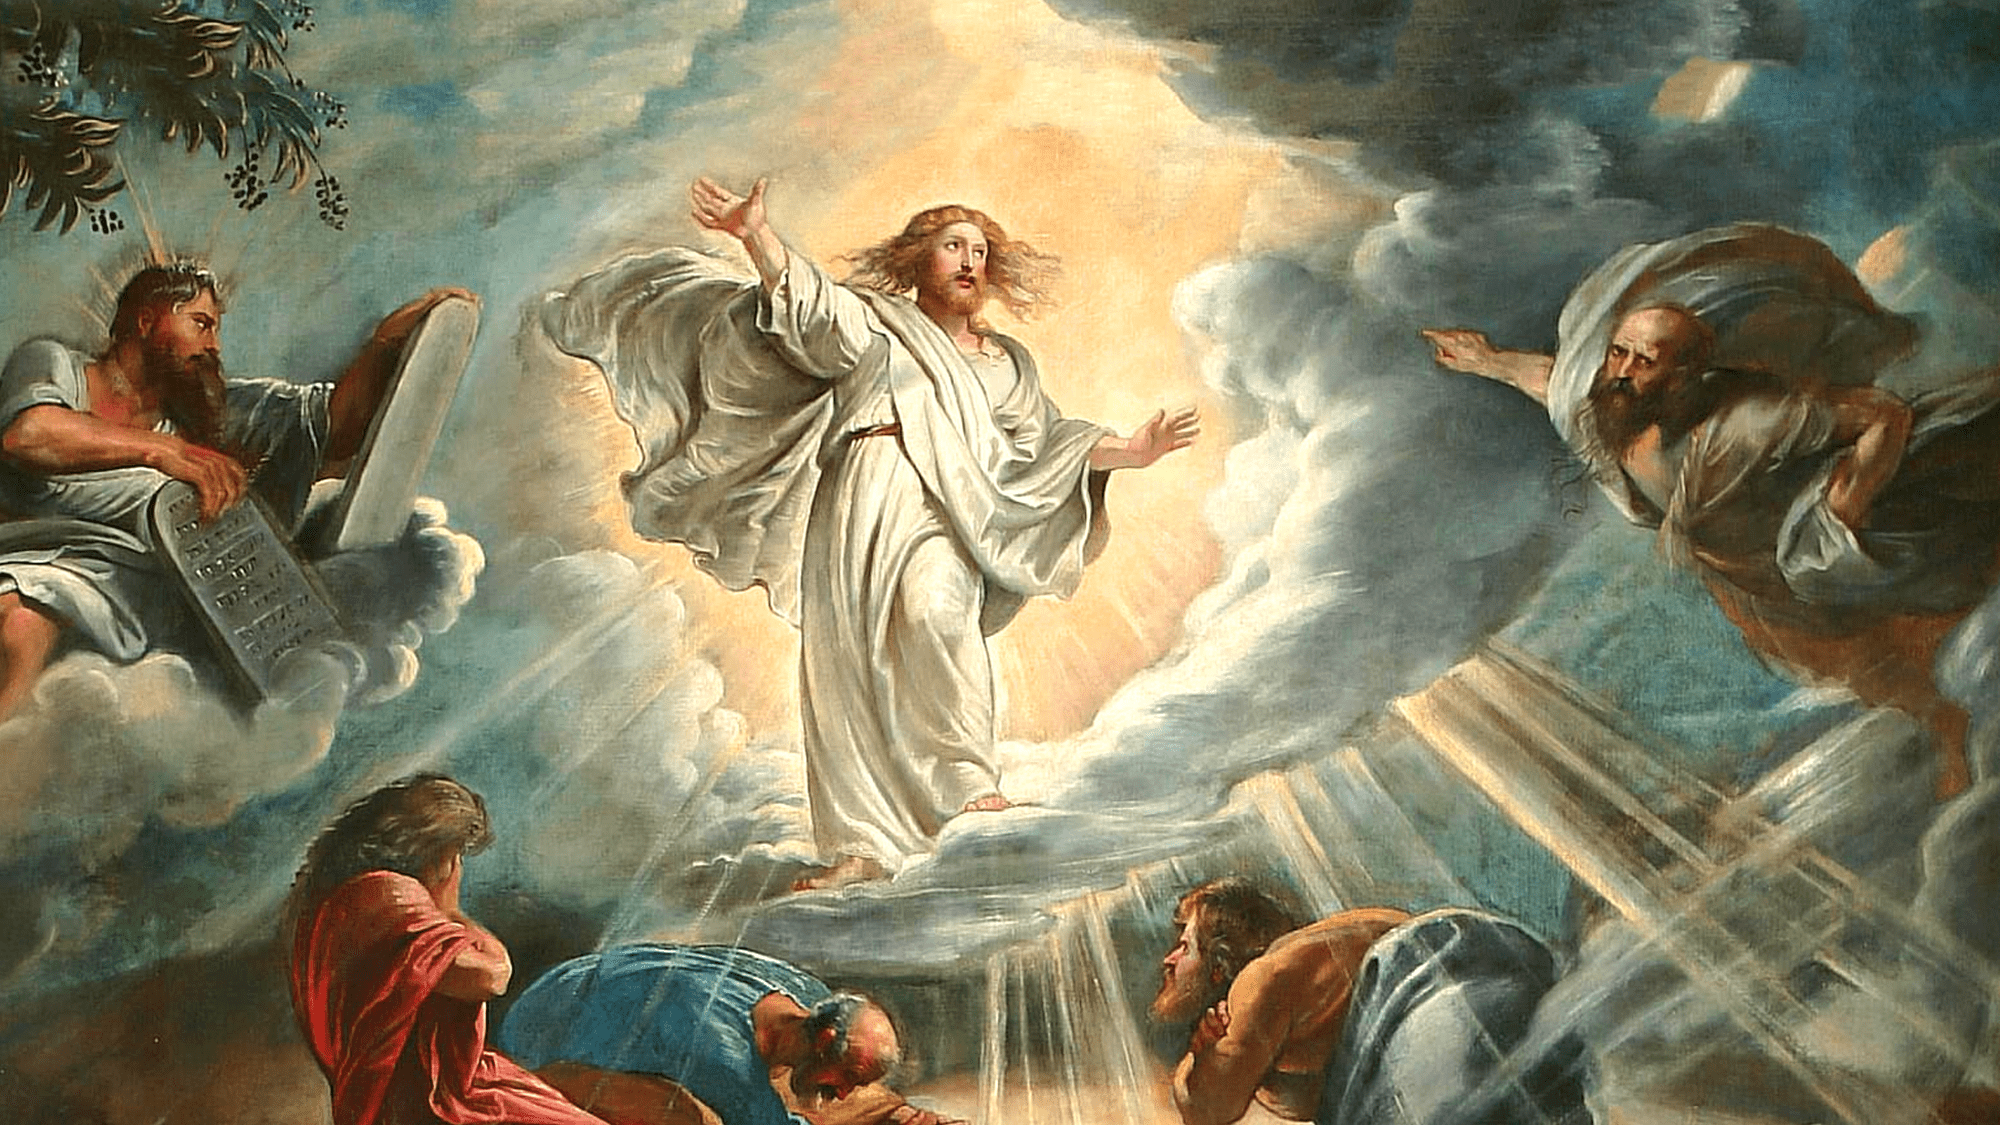 Feast of the Transfiguration of the Lord